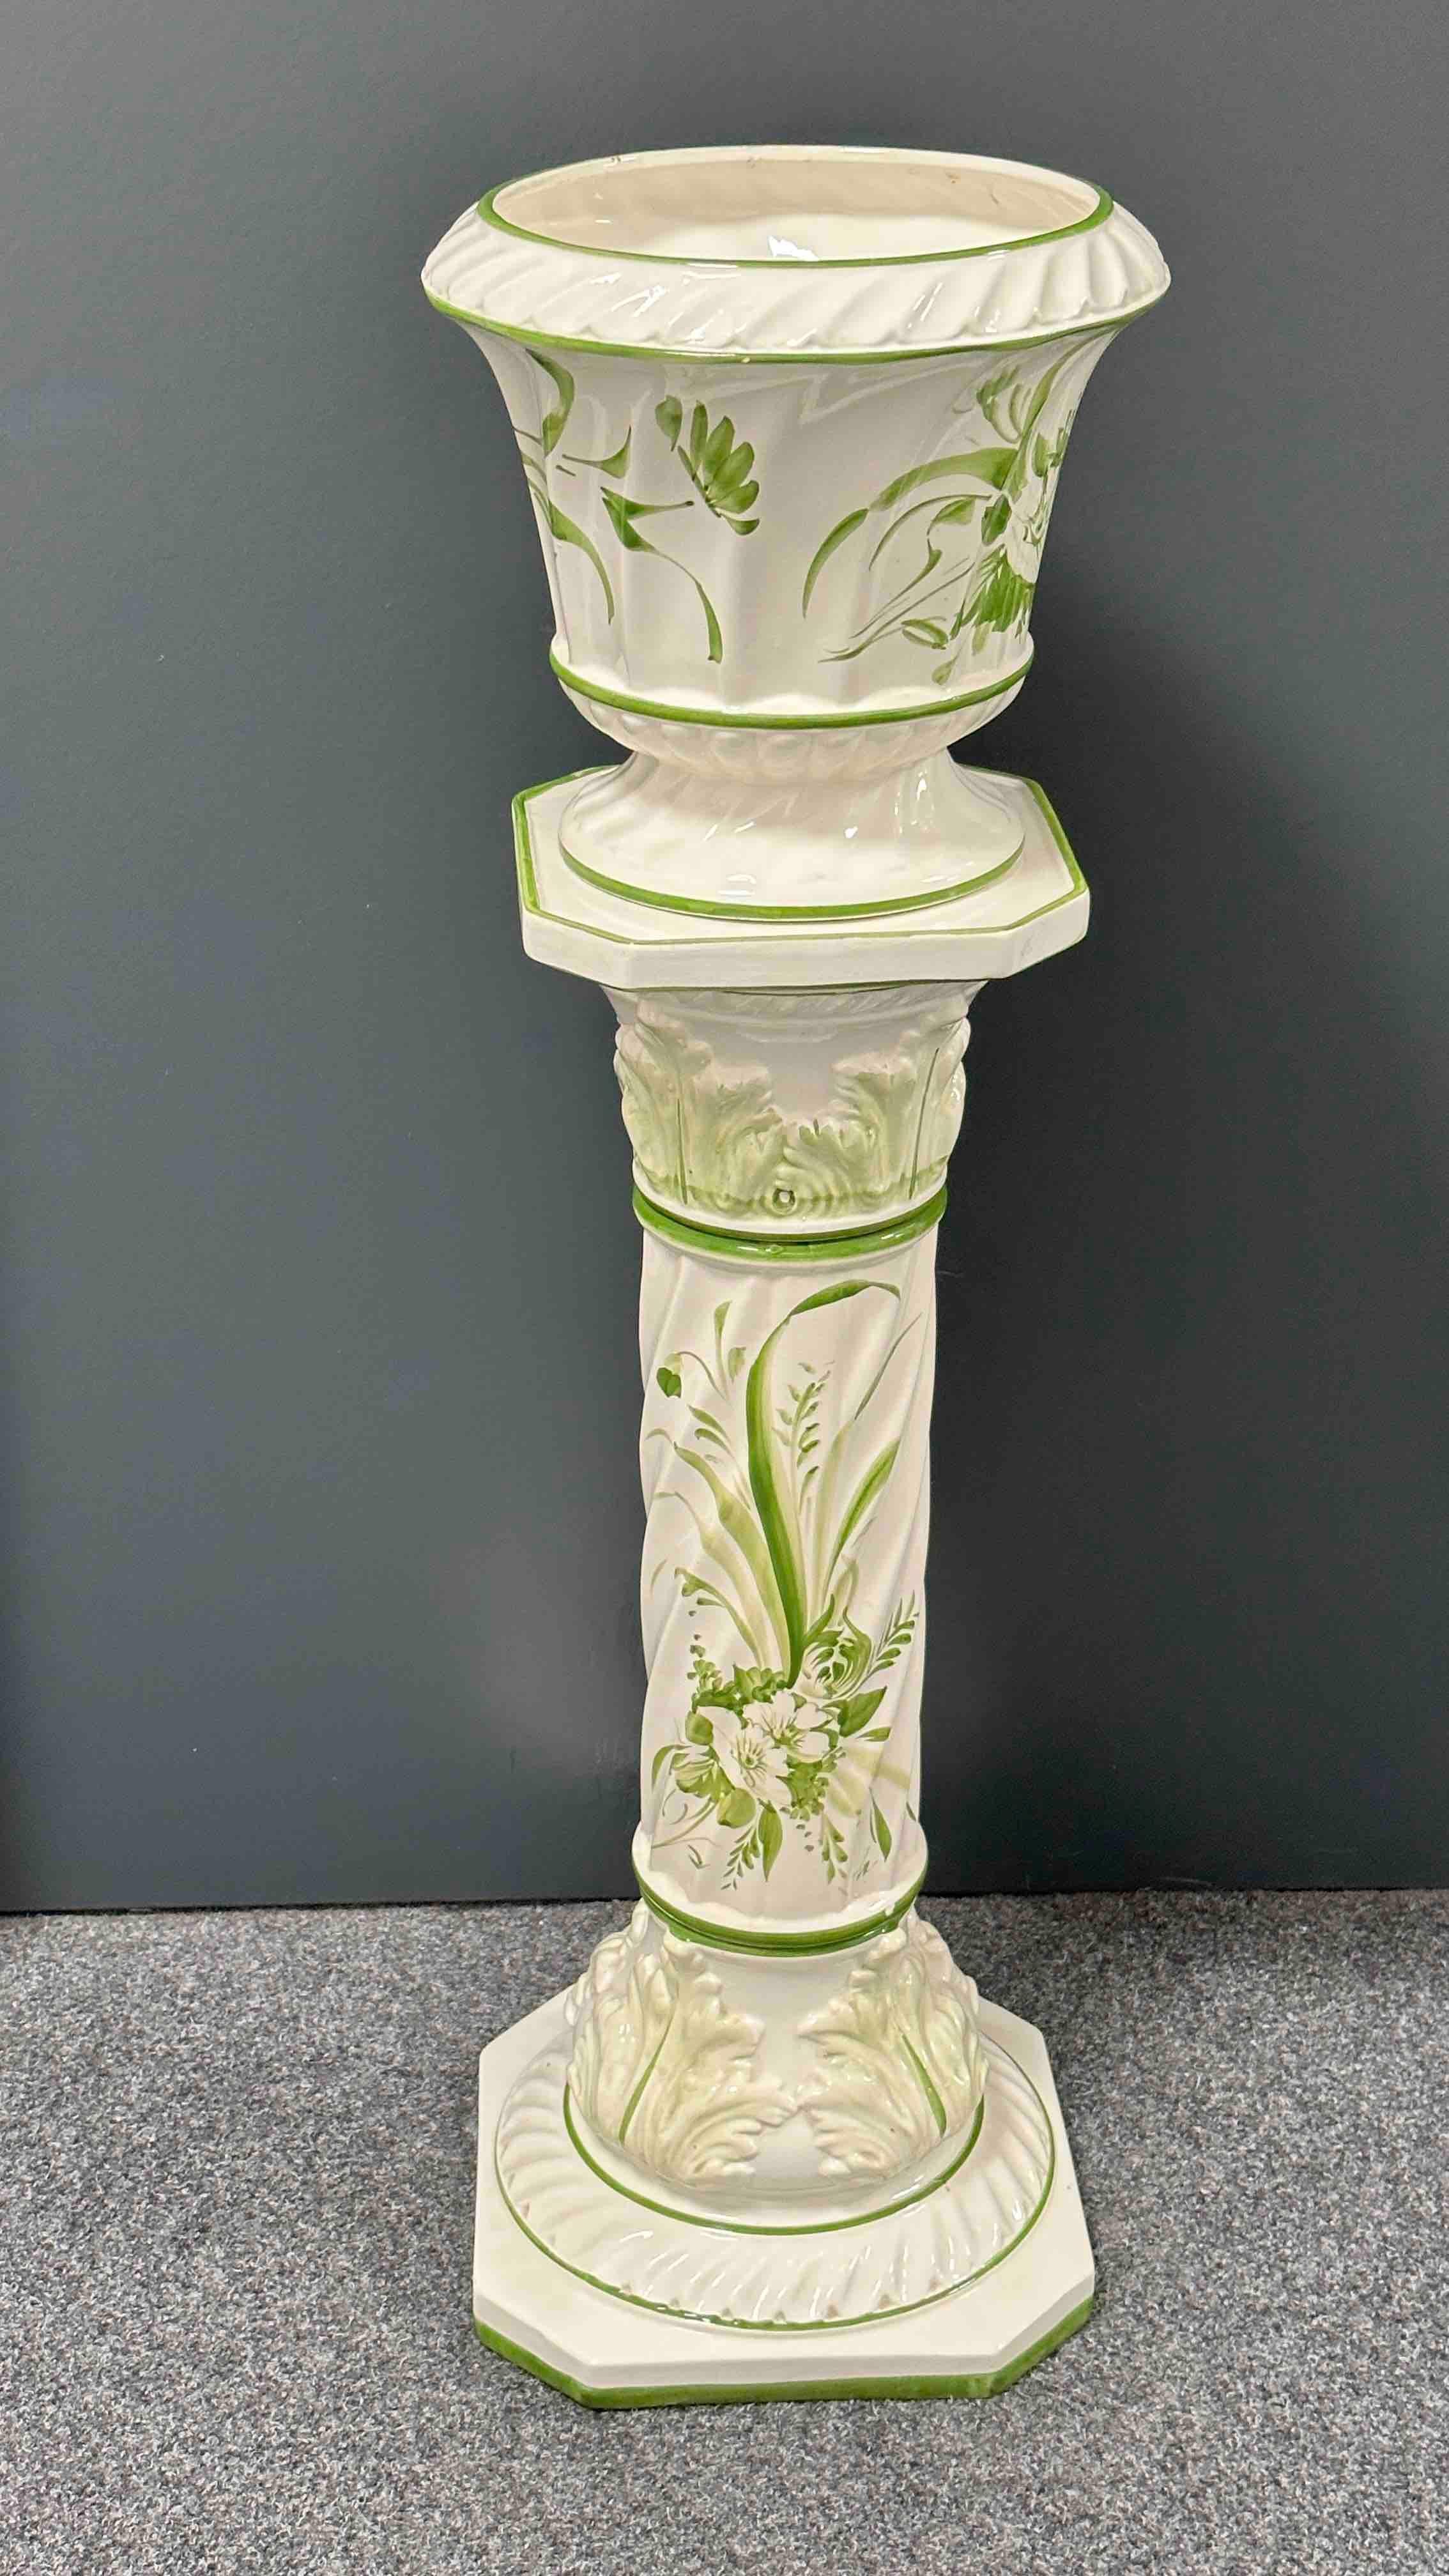 20th century glazed ceramic pedestal plant stand and flower pot seat. Handmade of ceramic. Nice addition to your home, patio or garden. This is in used condition, with signs of wear as expected with age and use. Marked Italy. 
The pedestal is